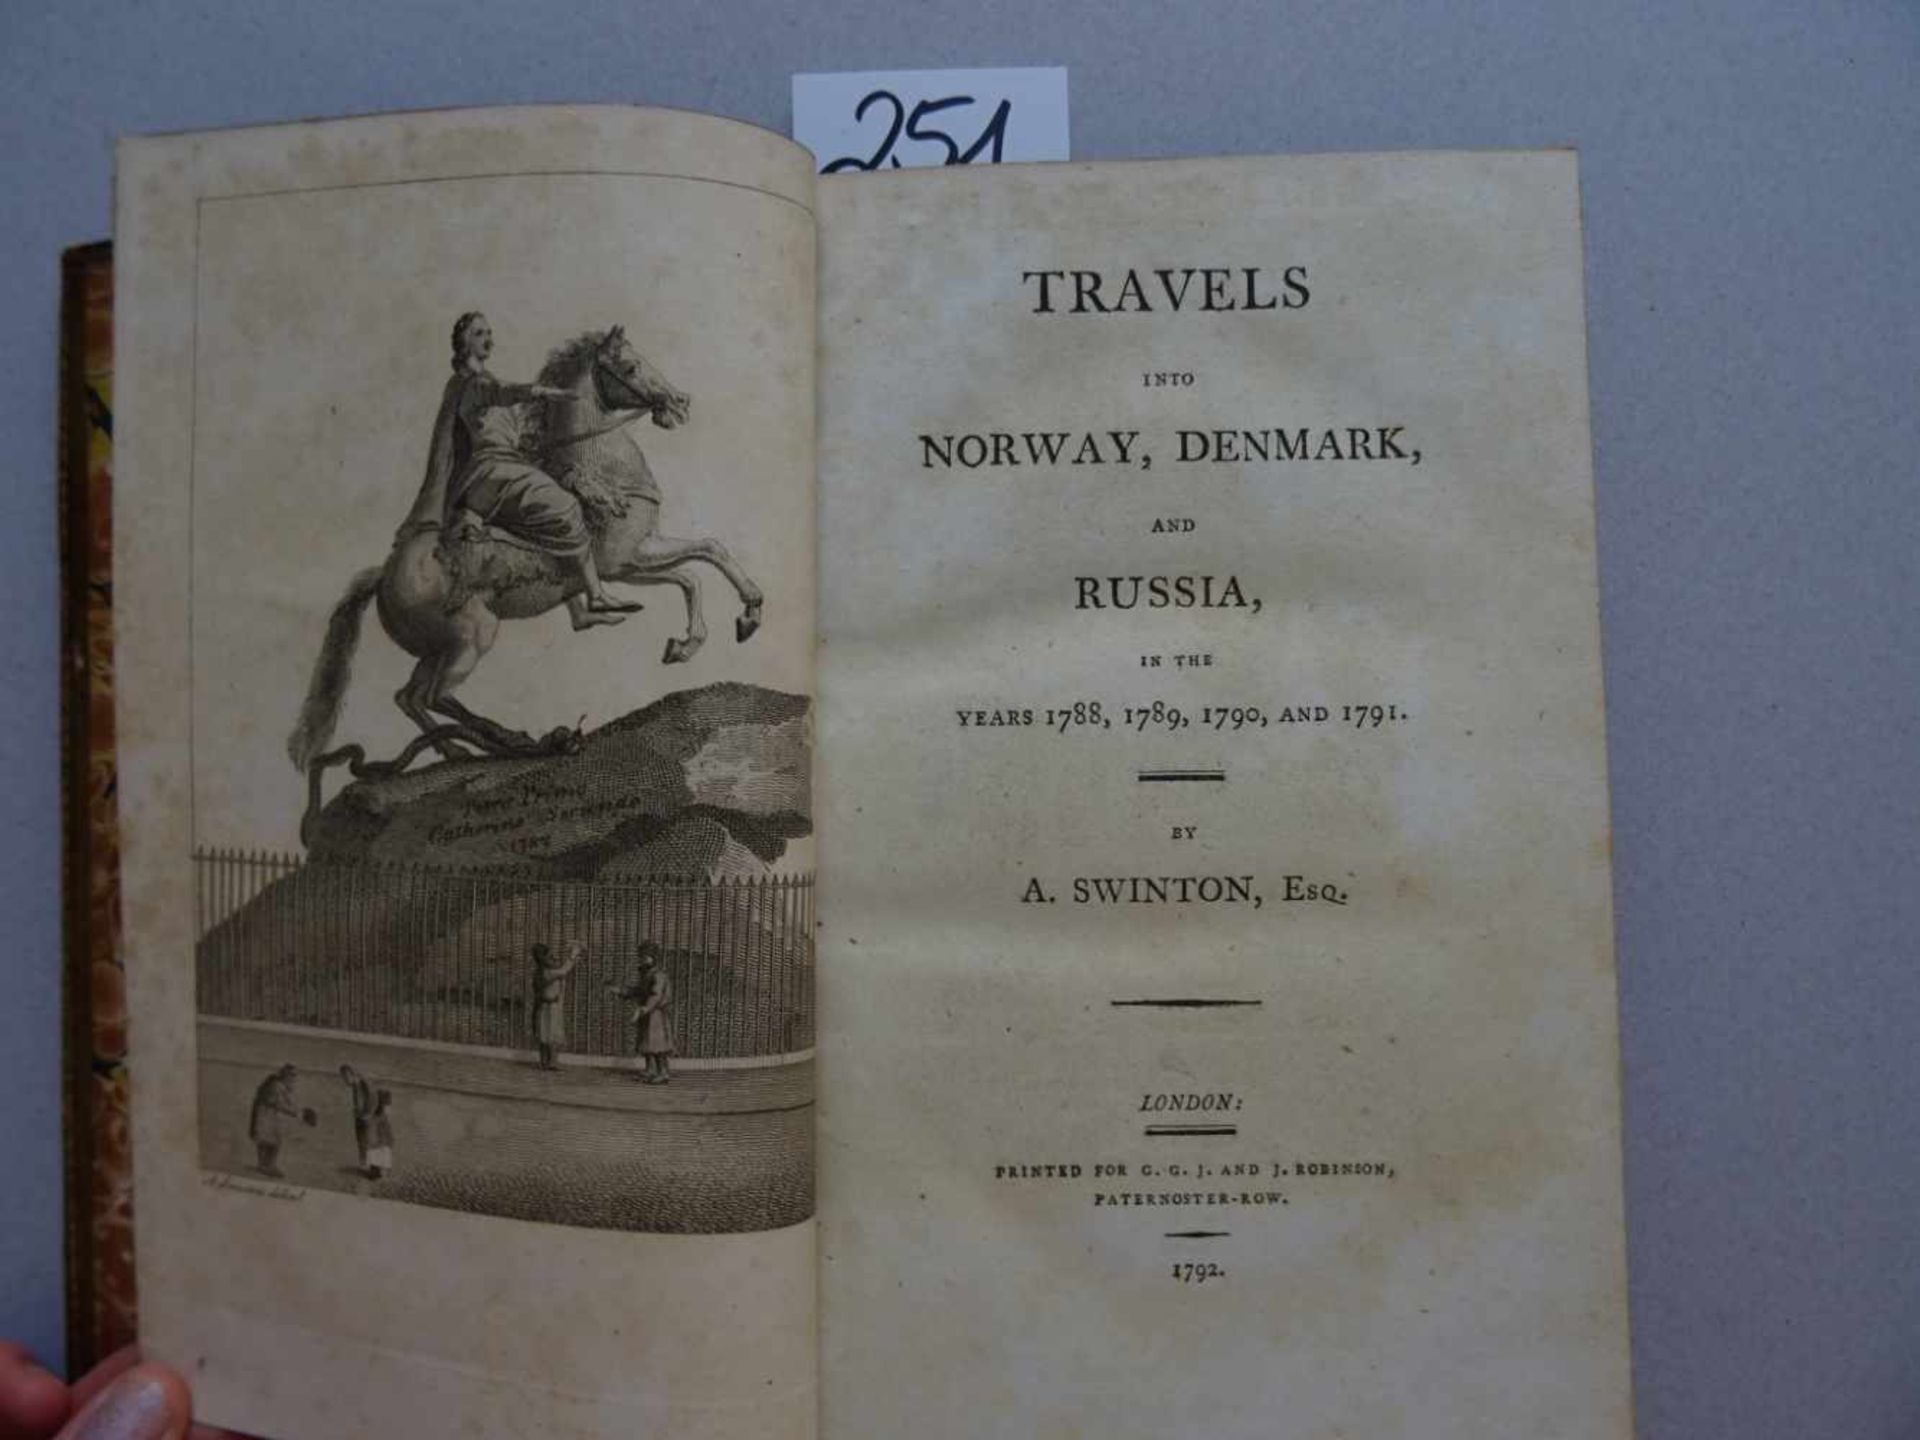 Skandinavien.- Swinton, A. (d.i. W. Thomson).Travels into Norway, Denmark and Russia, in the years